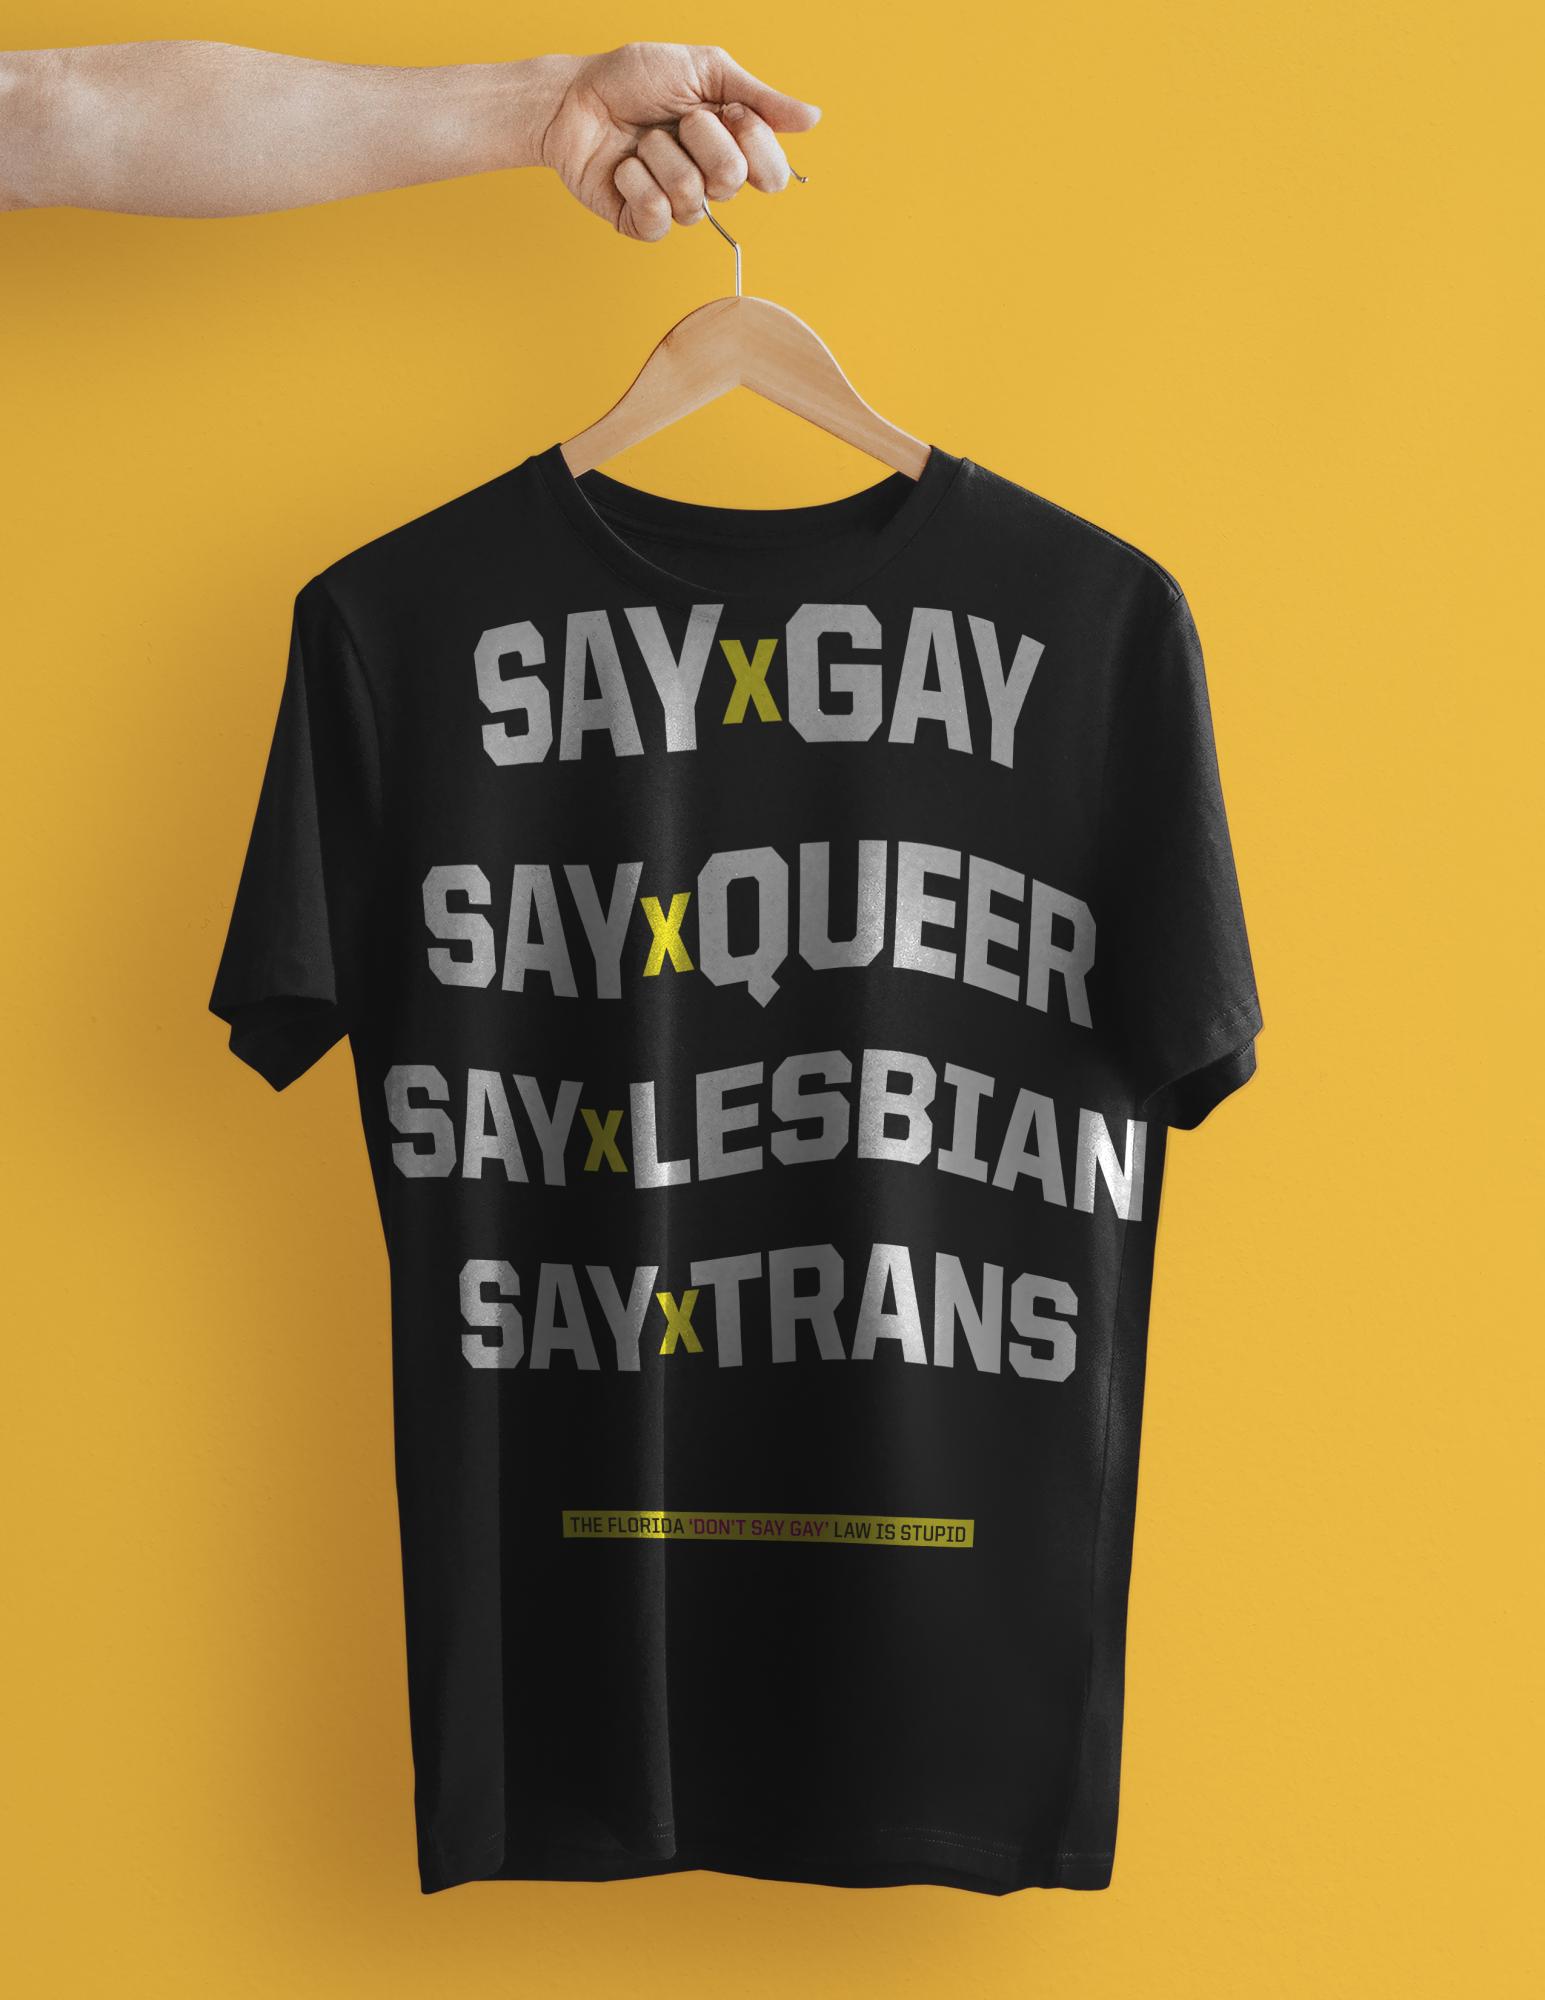 Say Gay (Workshop Designs) - Simple t-shirt mockup psd in black with hand holding hanger